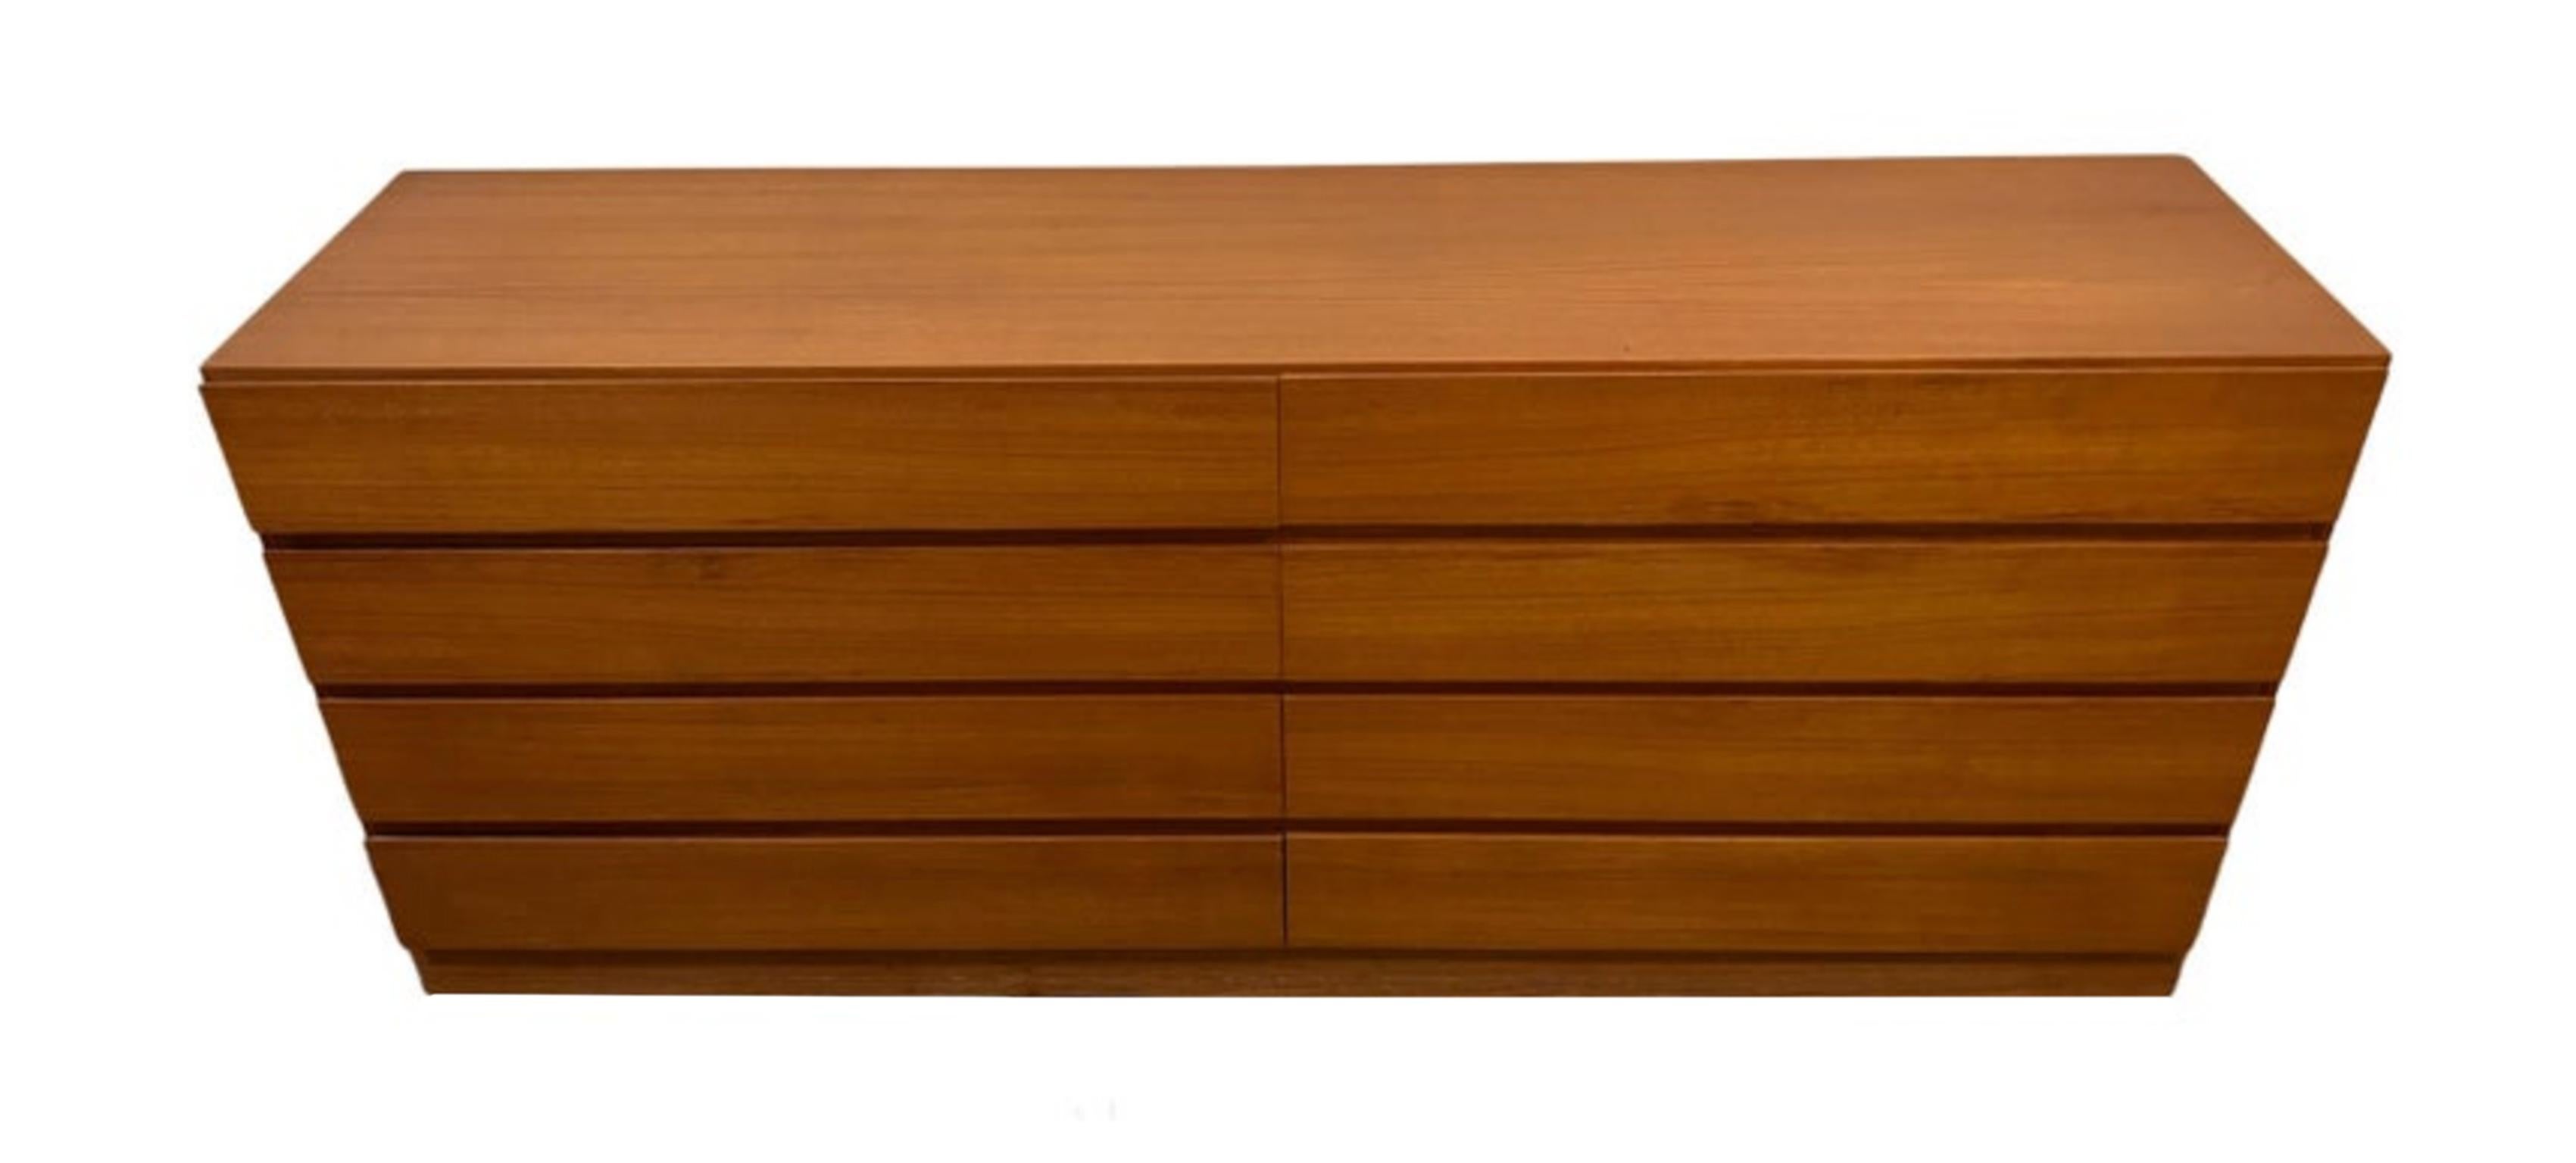 Mid century Danish Modern 8 drawer teak dresser or credenza. Beautiful light teak color with a nice grain. All drawers clean inside and out as well as slide smooth. Simple symmetric design - good lines.. Shows very little use. Made In Denmark.